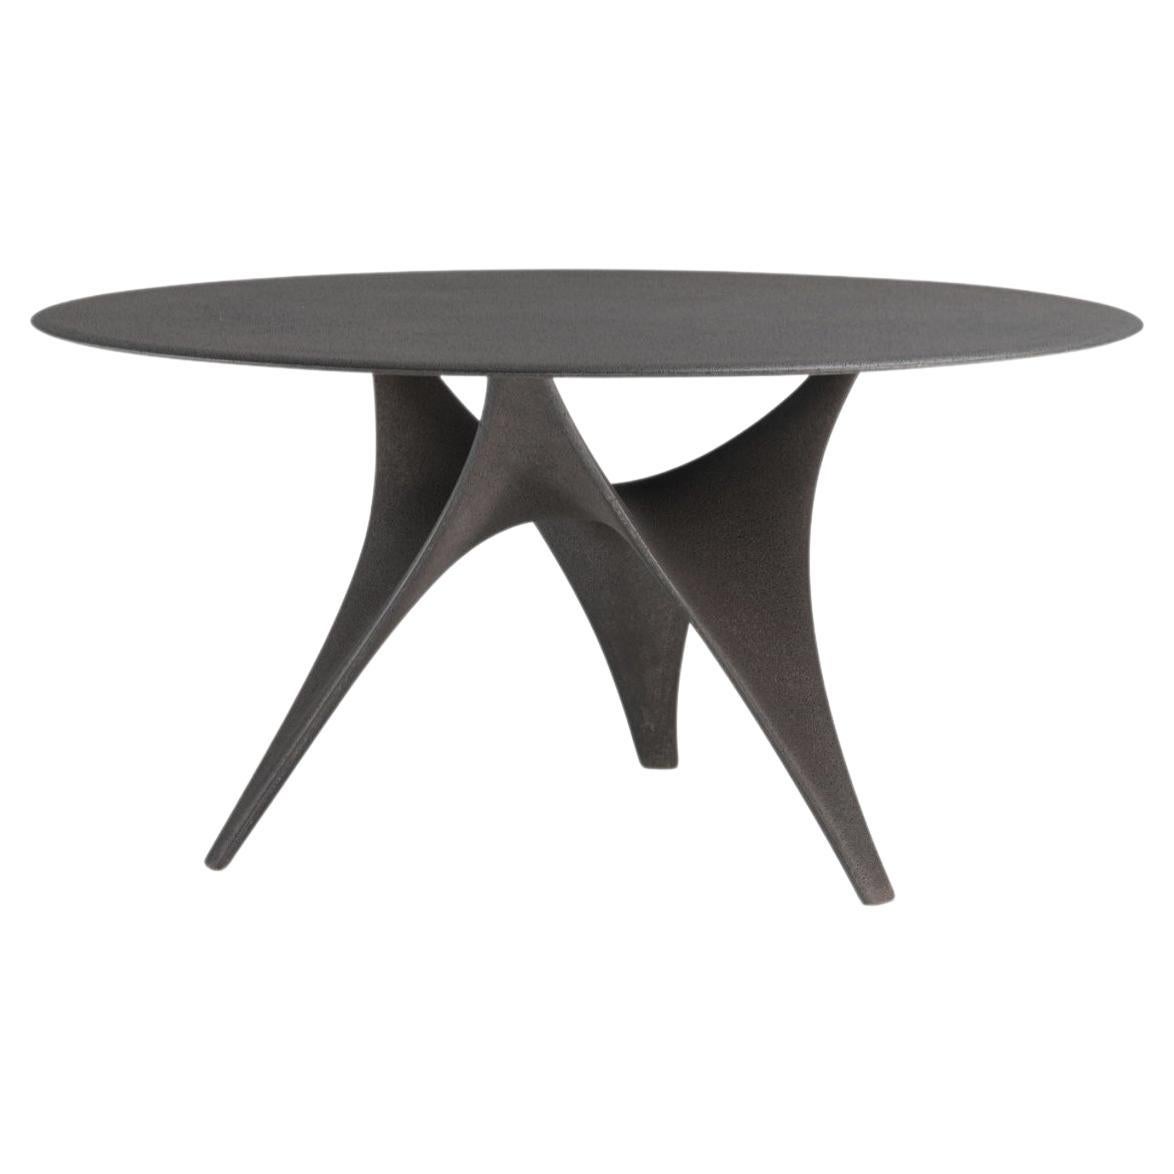 Outdoor Grey Cement Table Molteni&C by Foster + Partners Made in Italy